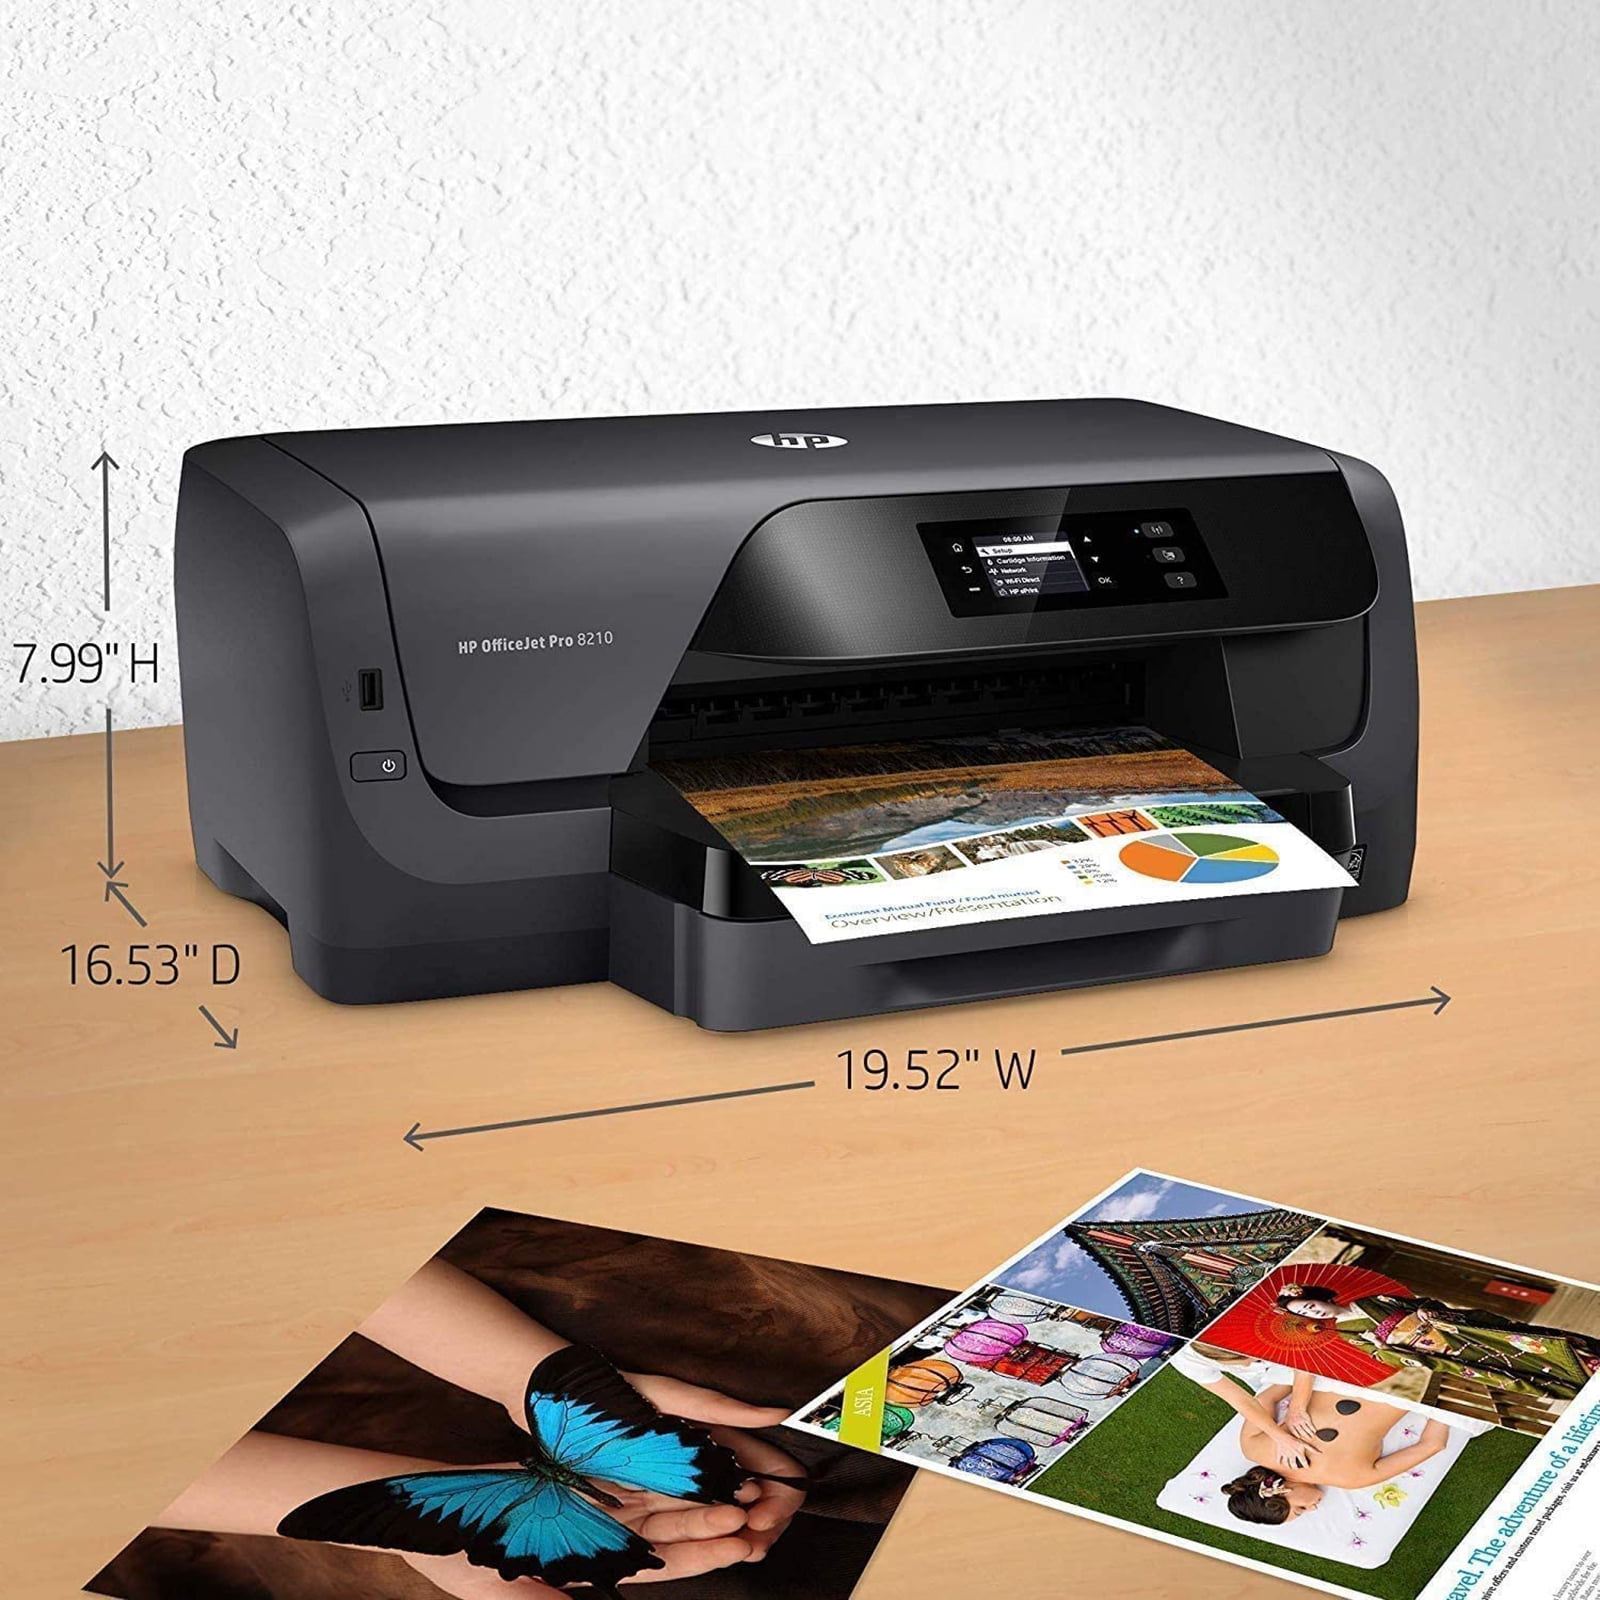 HP OfficeJet Pro 8210 Wireless Color Printer with and Instant Ink $5 Prepaid Code D9L64A 